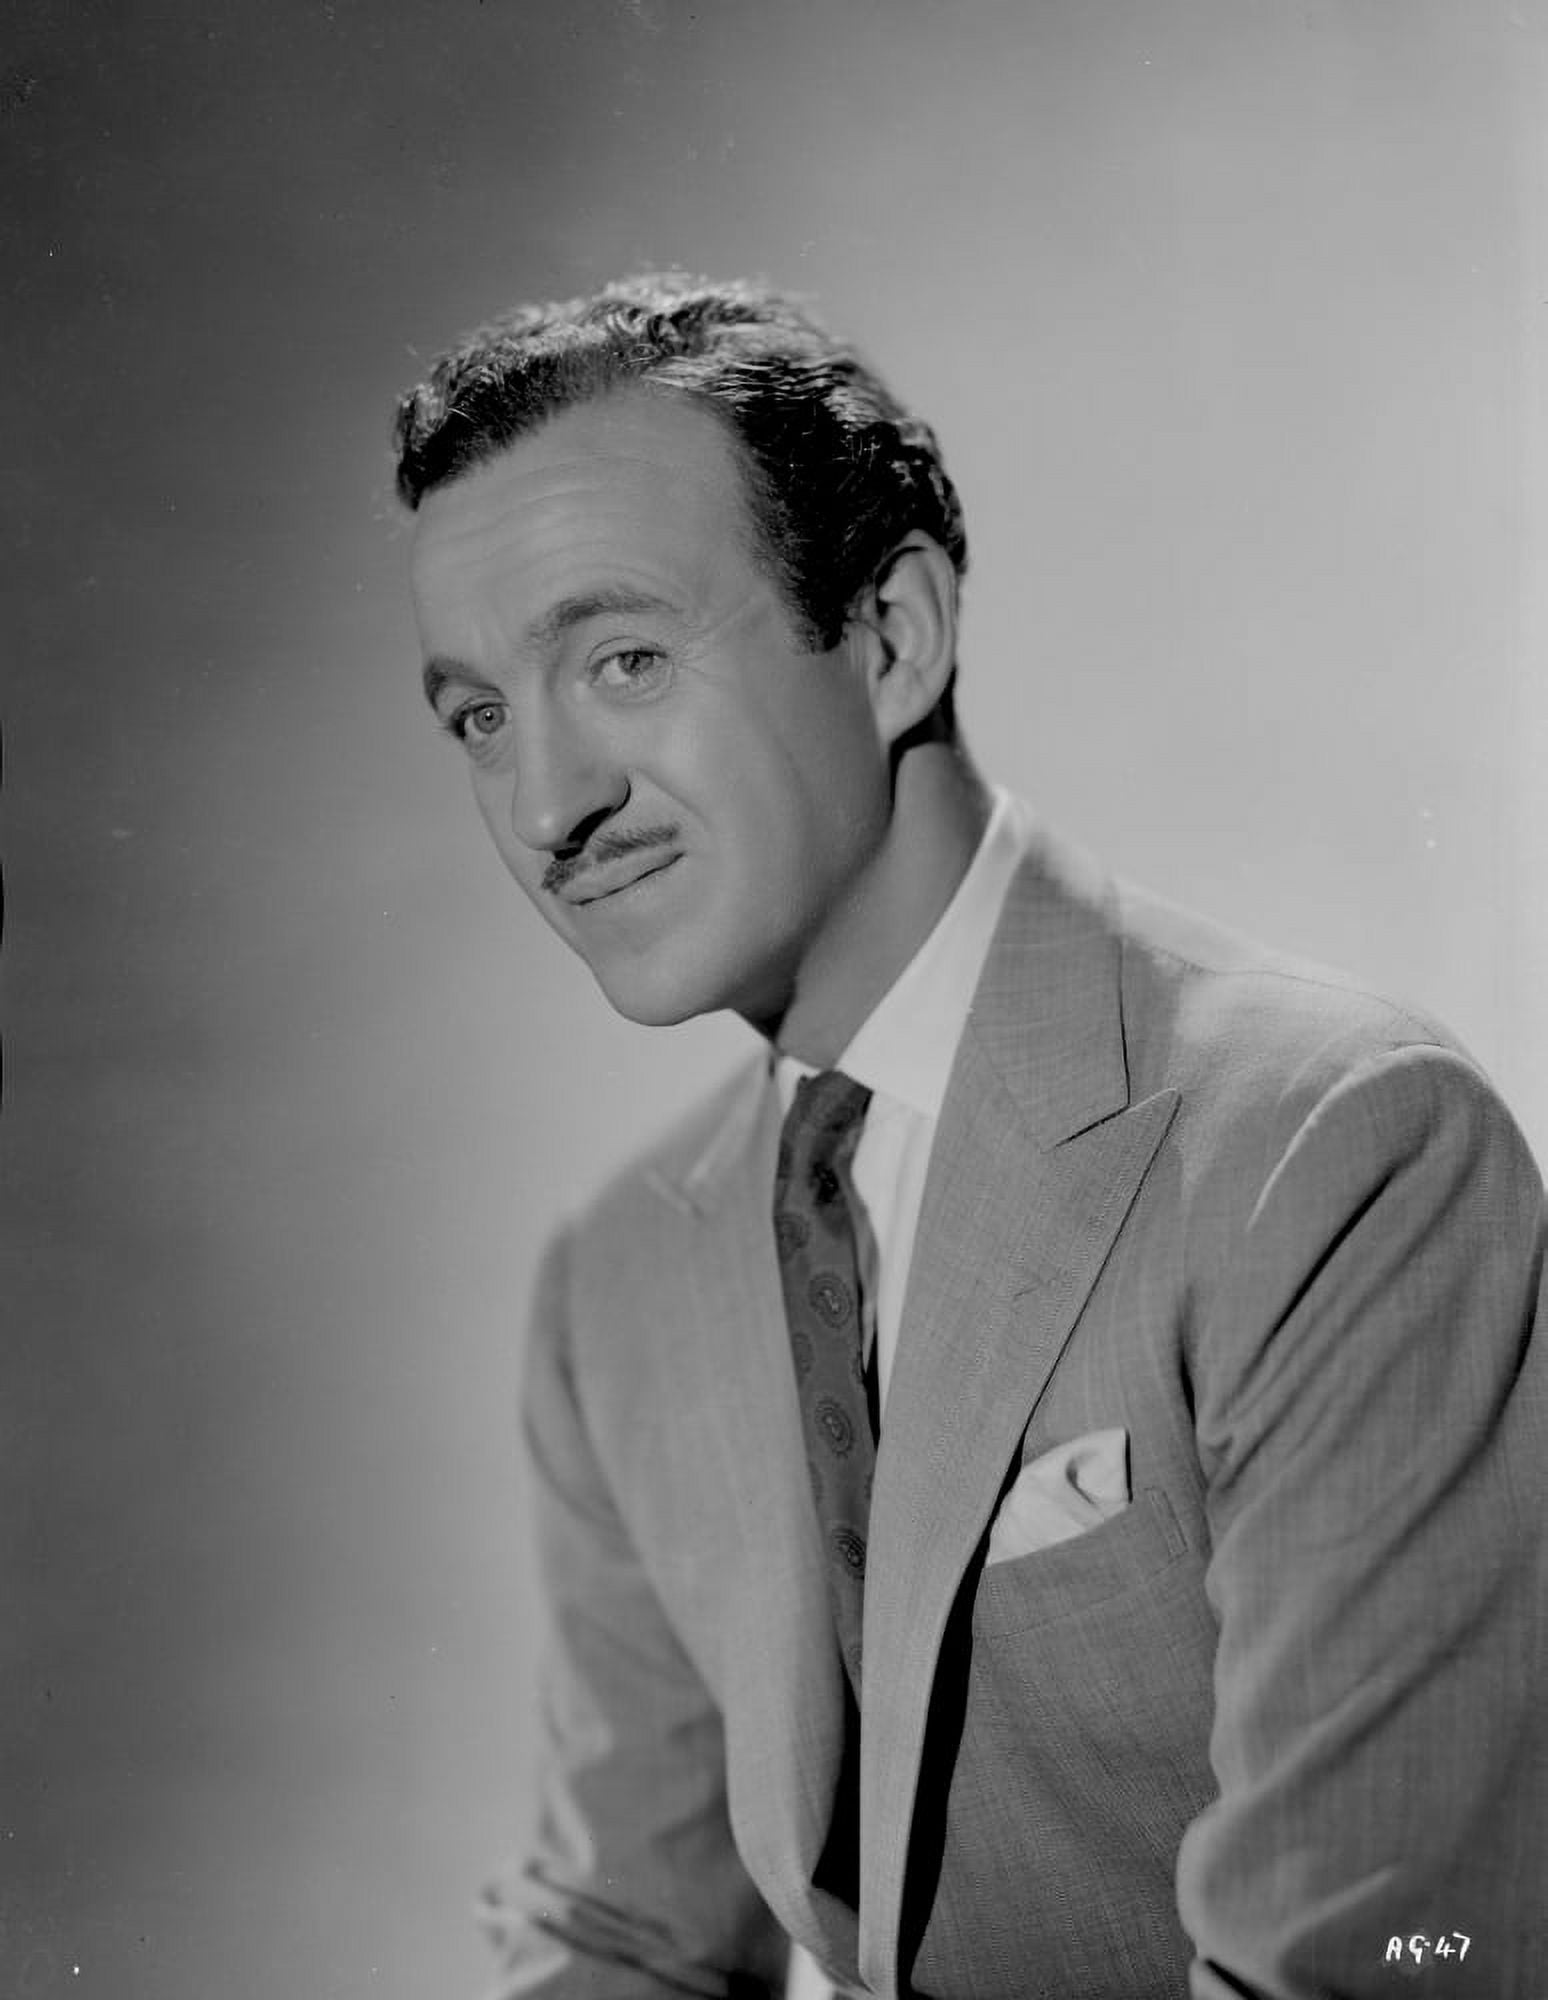 DAVID NIVEN (1910-1983). Scottish cinemactor For sale as Framed Prints,  Photos, Wall Art and Photo Gifts